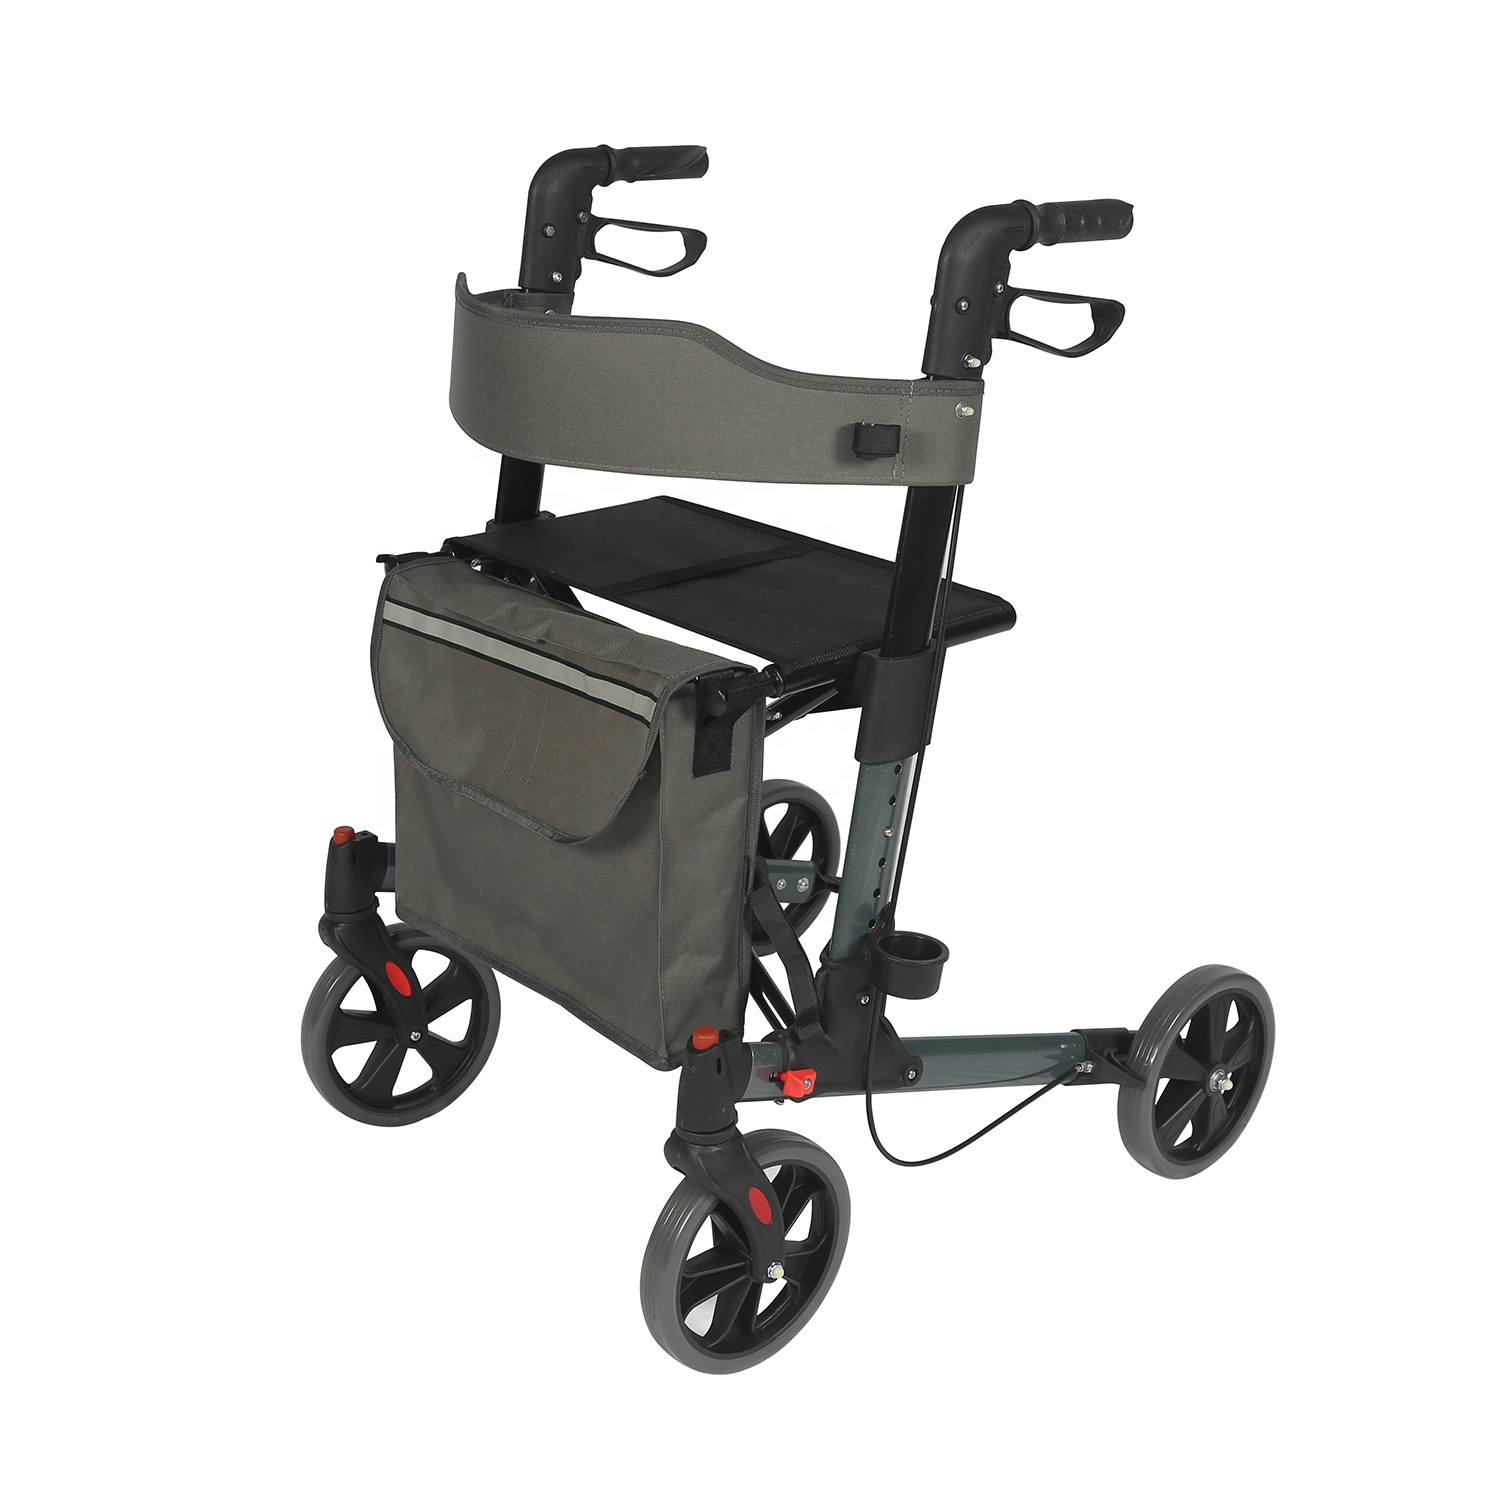 Adjustable Handle Aluminum Folding for Adults and Disable